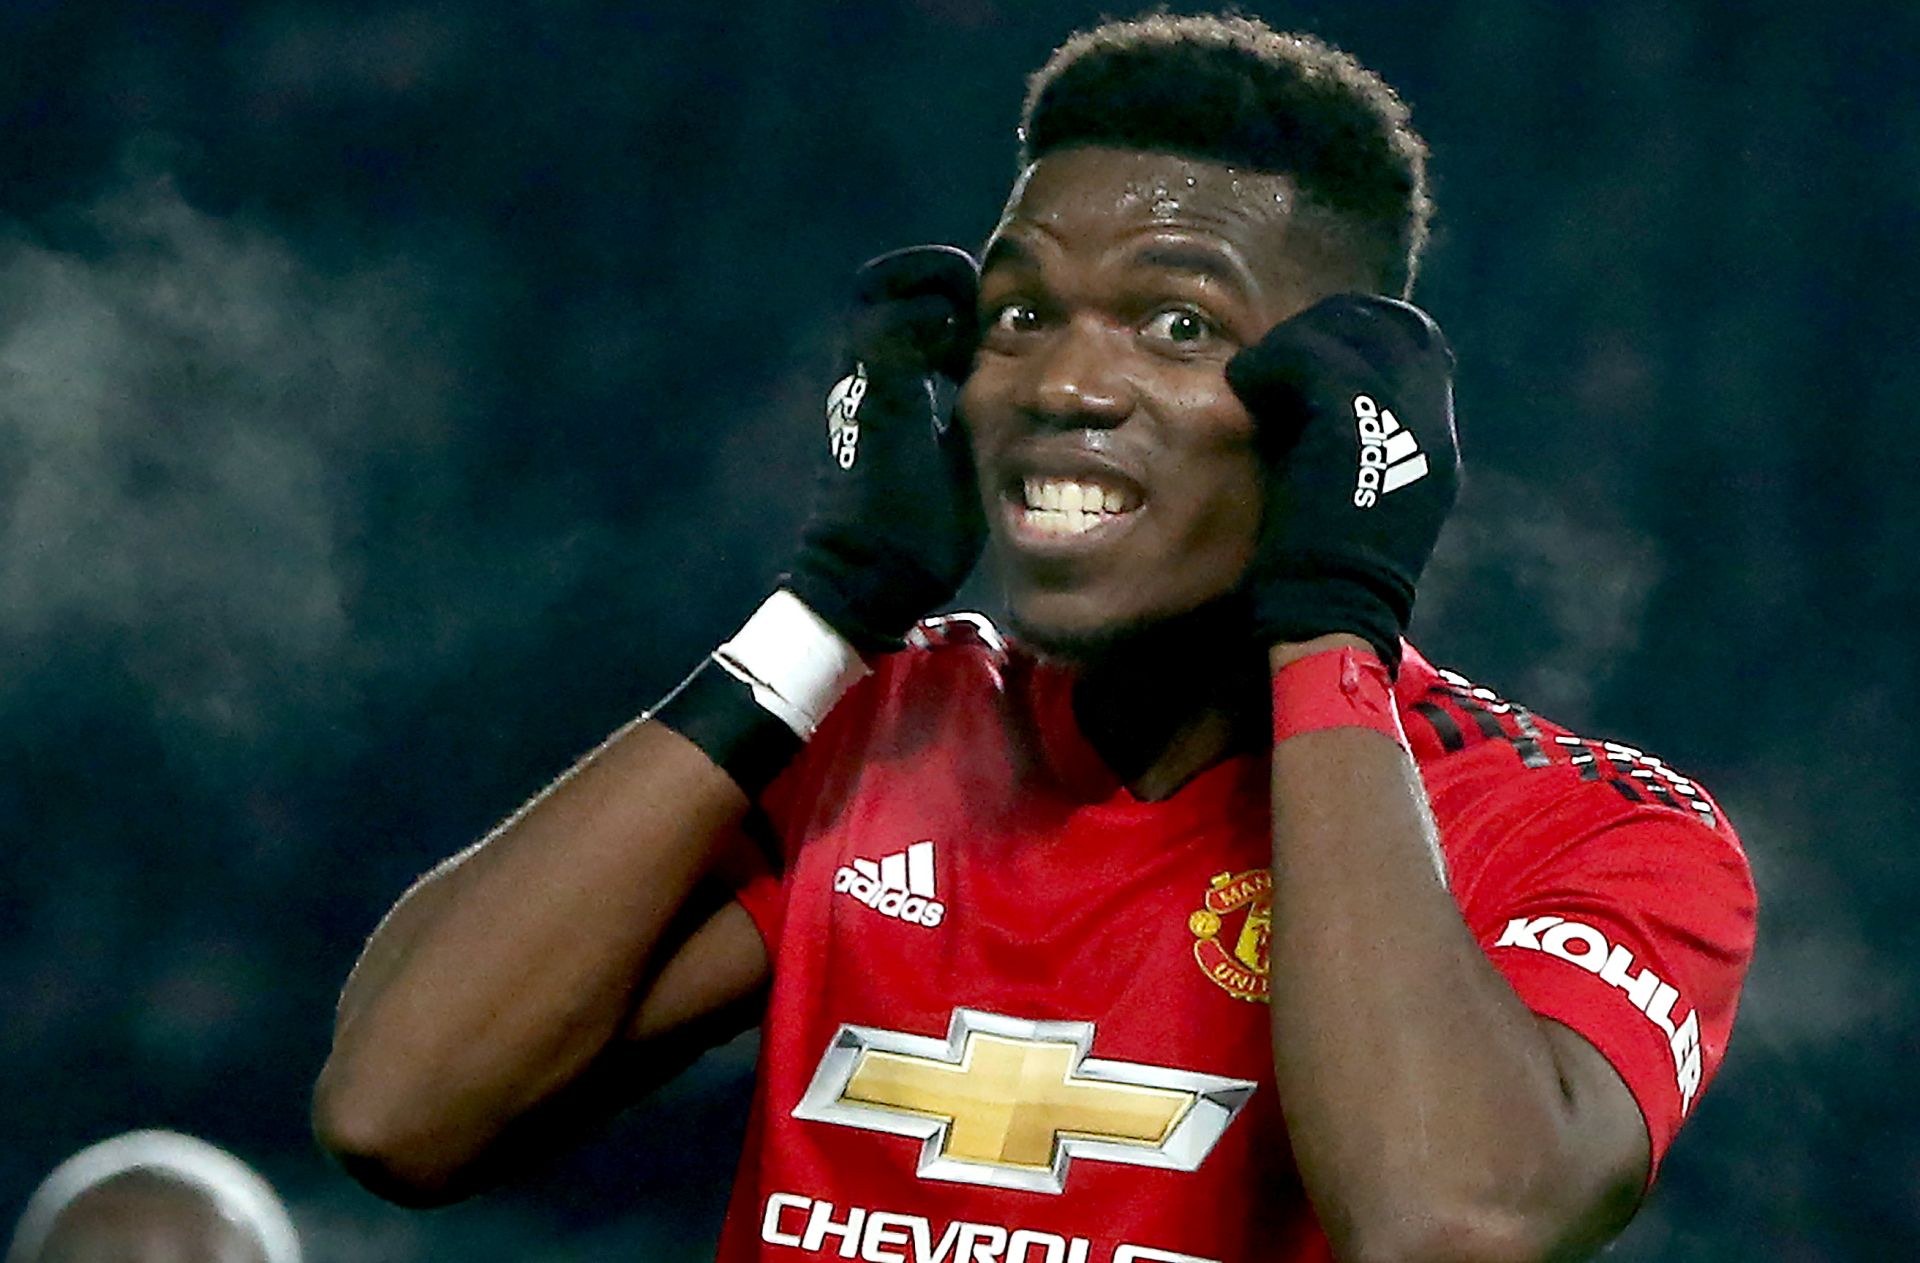 epa07330485 Manchester United's Paul Pogba reacts during the English premier league soccer match between Manchester United and Burnley at Old Trafford Stadium in Manchester, Britain, 29 January 2019.  EPA/Nigel Roddis EDITORIAL USE ONLY. No use with unauthorized audio, video, data, fixture lists, club/league logos or 'live' services. Online in-match use limited to 120 images, no video emulation. No use in betting, games or single club/league/player publications